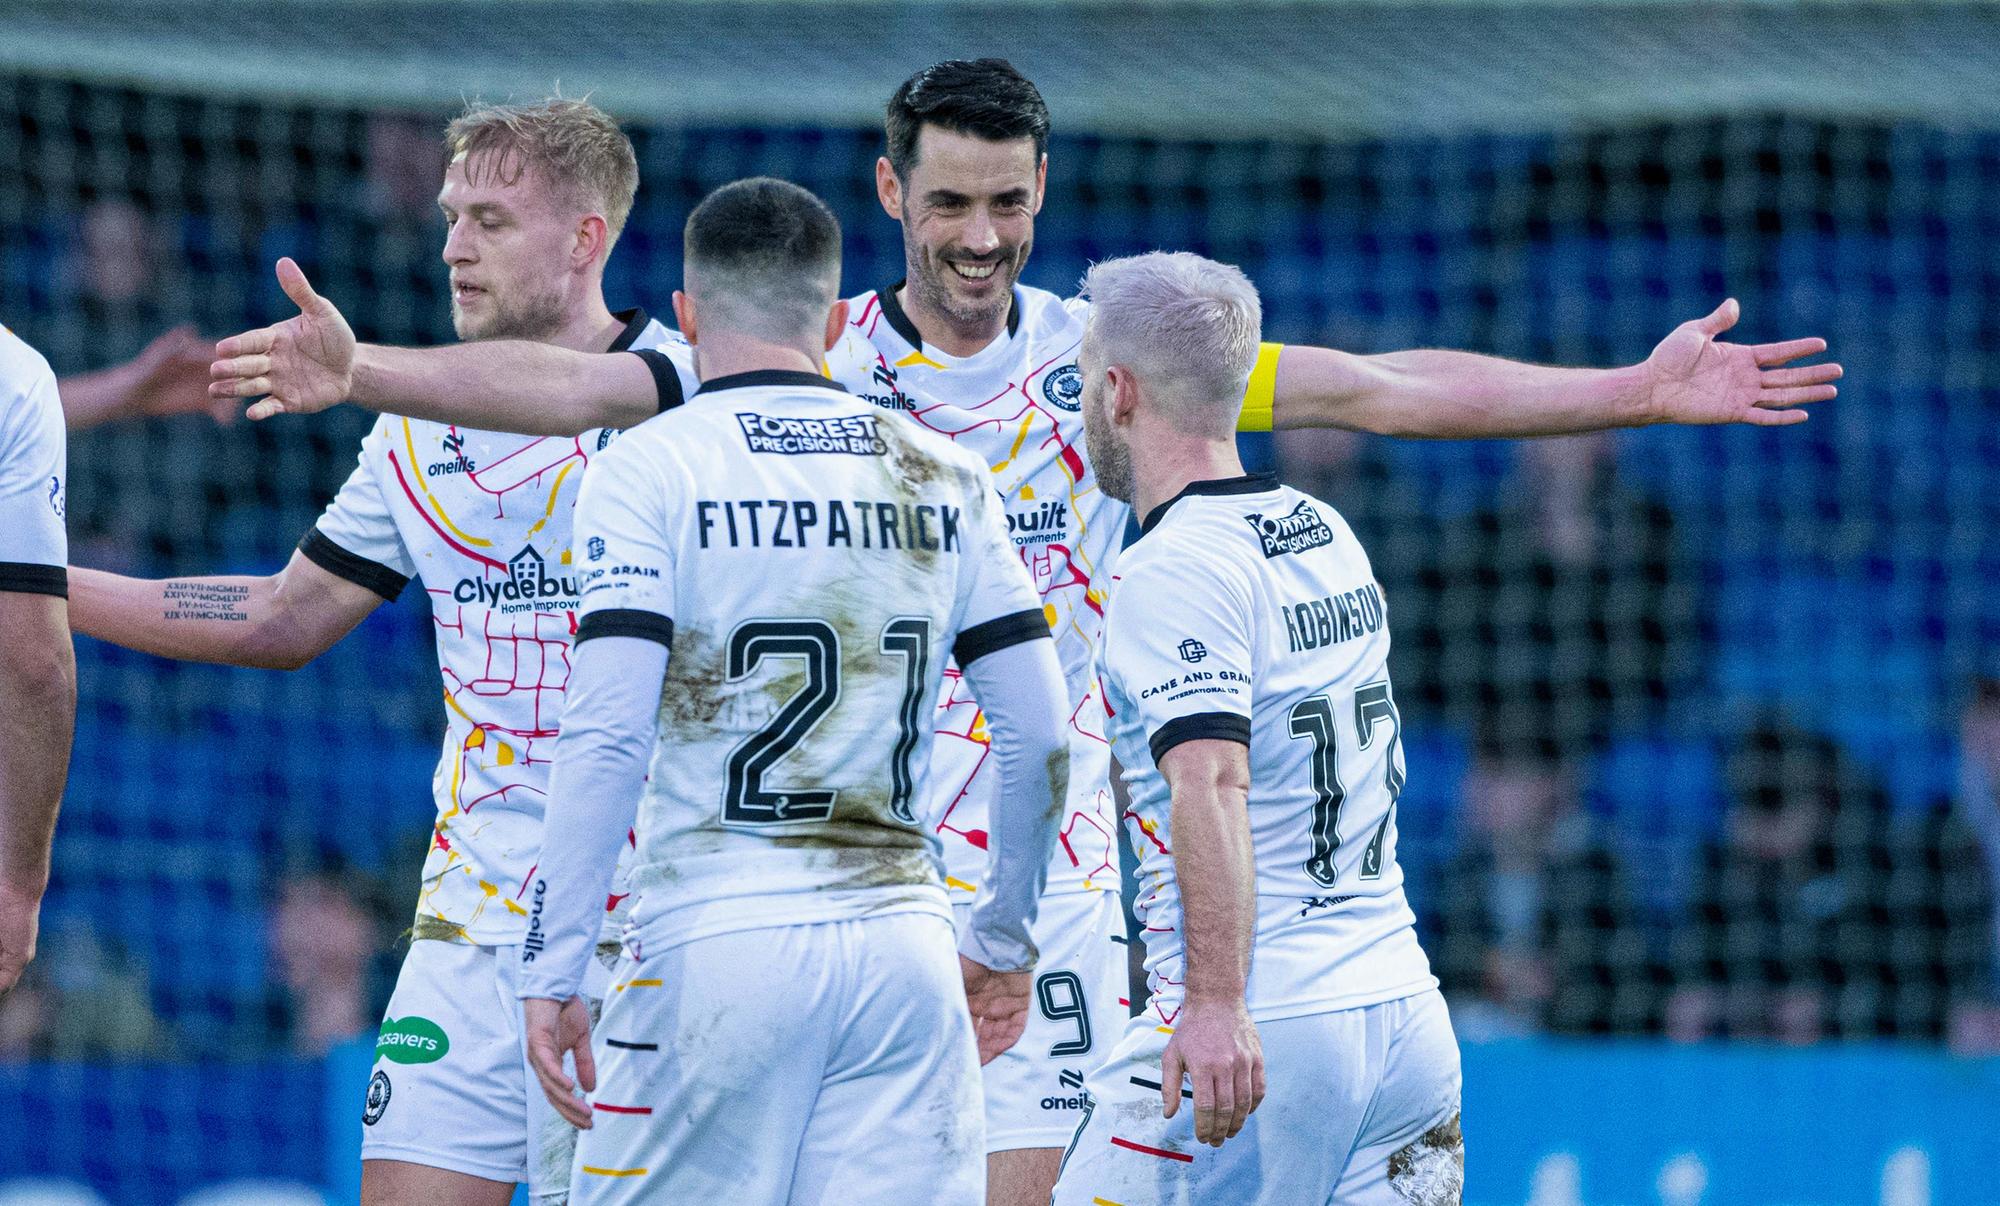 scottish cup shocks for st johnstone, ross county and falkirk as livingston recover from 'unbelievably bad' start